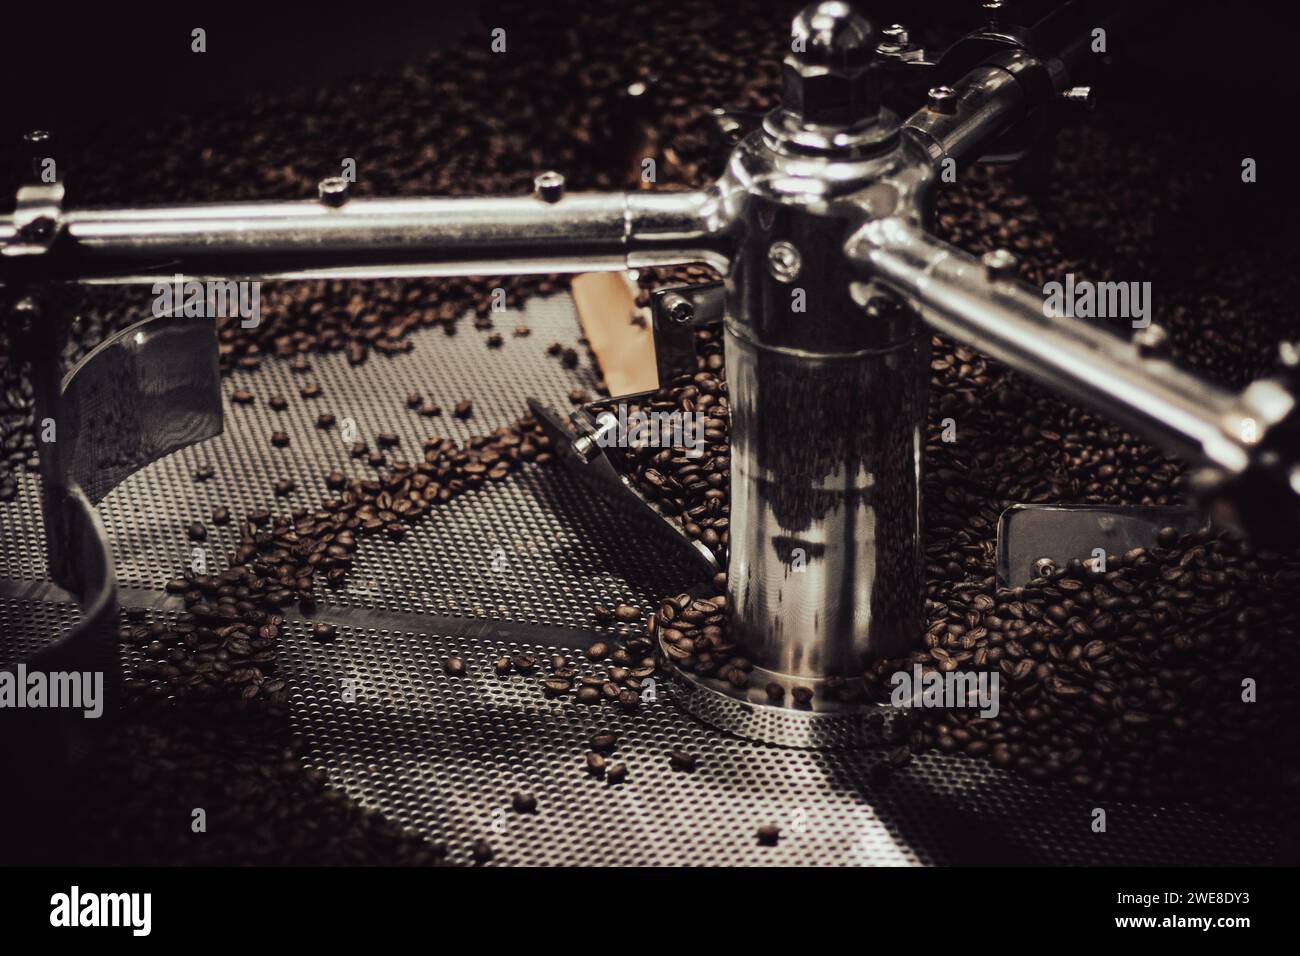 Close up of beans in a stainless steel industrial coffee roaster for an artisan coffee maker. Stock Photo